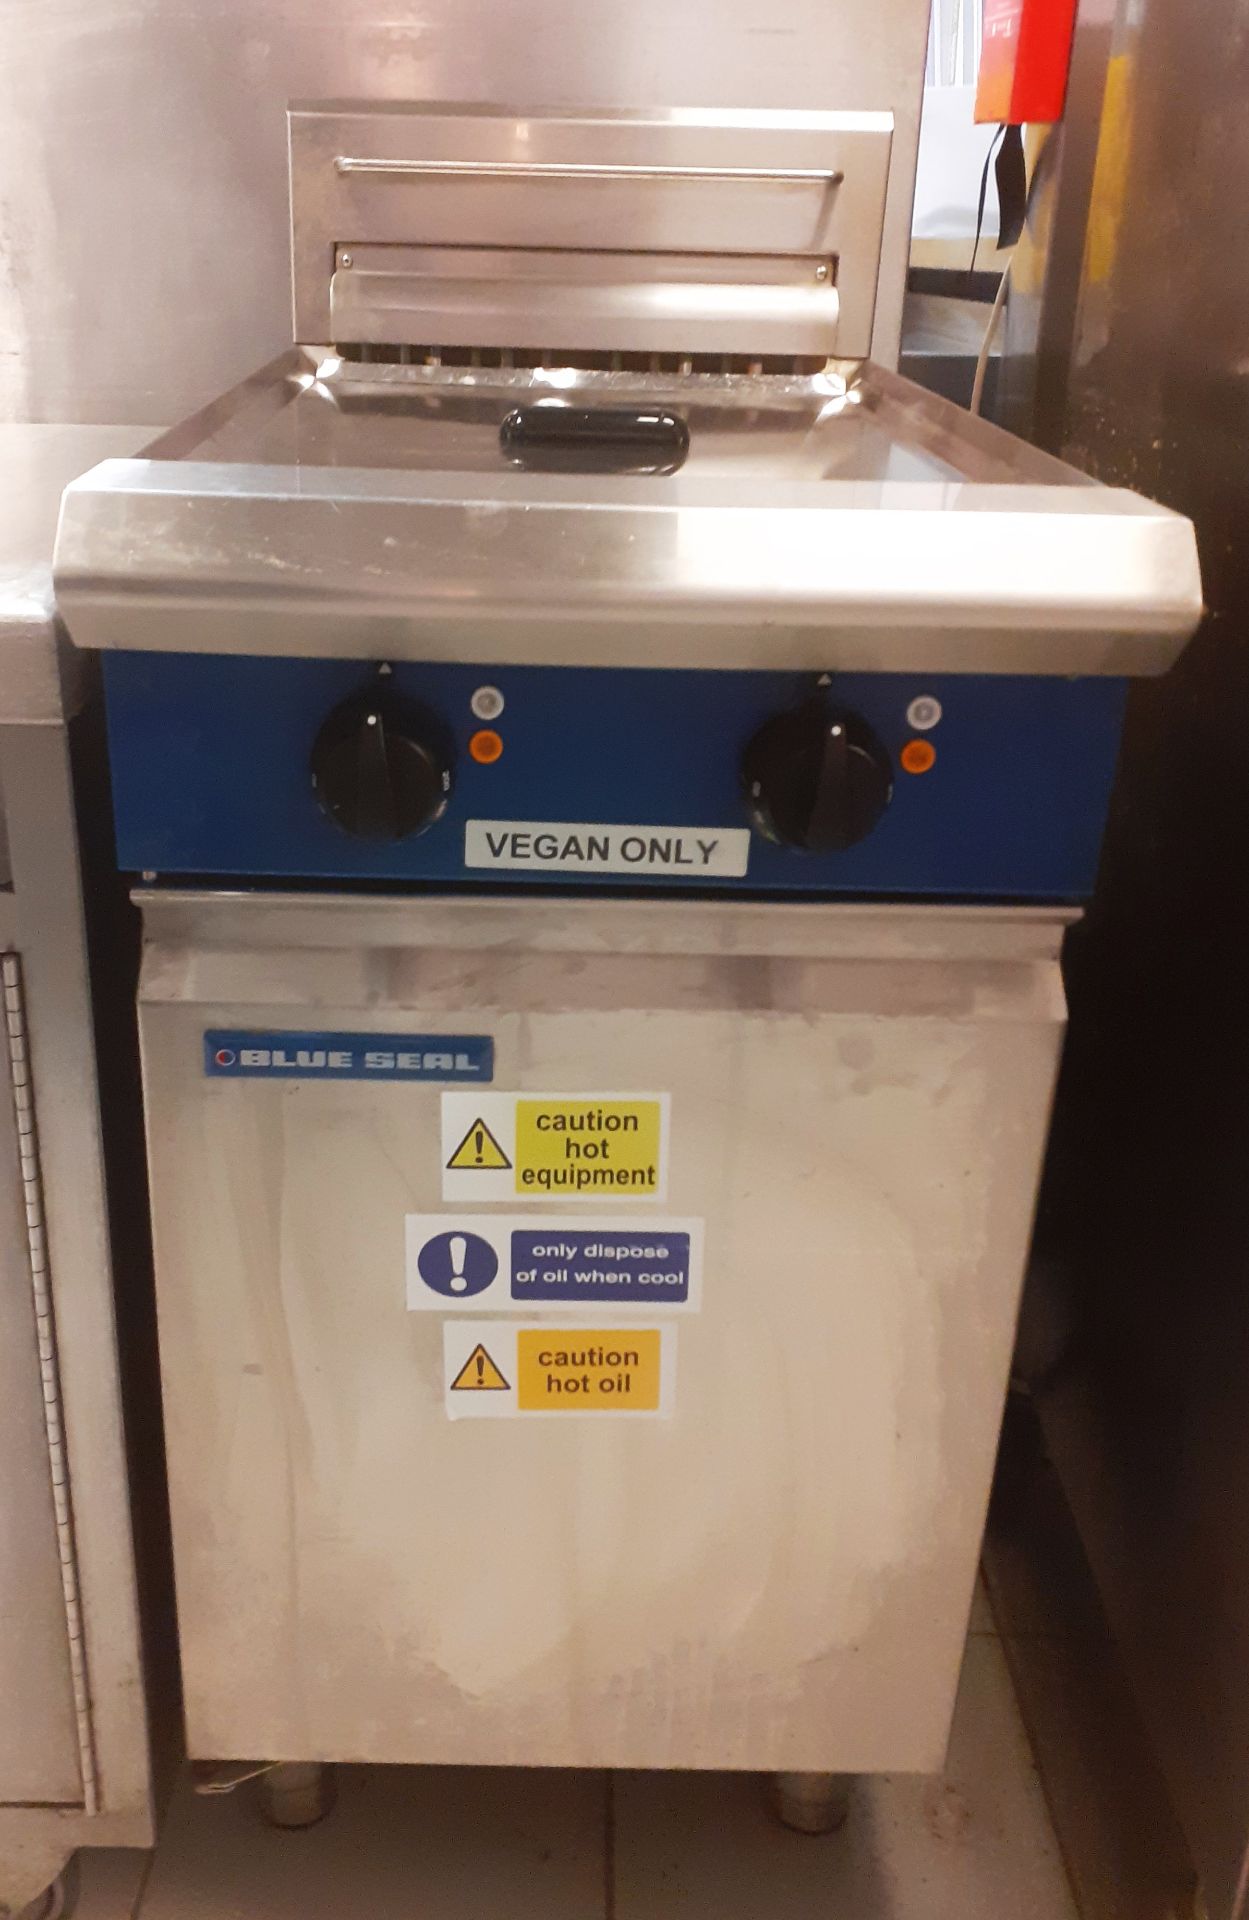 1 x Blue Seal Evolution 3 Phase Electric Twin Tank Fryer - RRP £2,200 - CL582 - Location: London